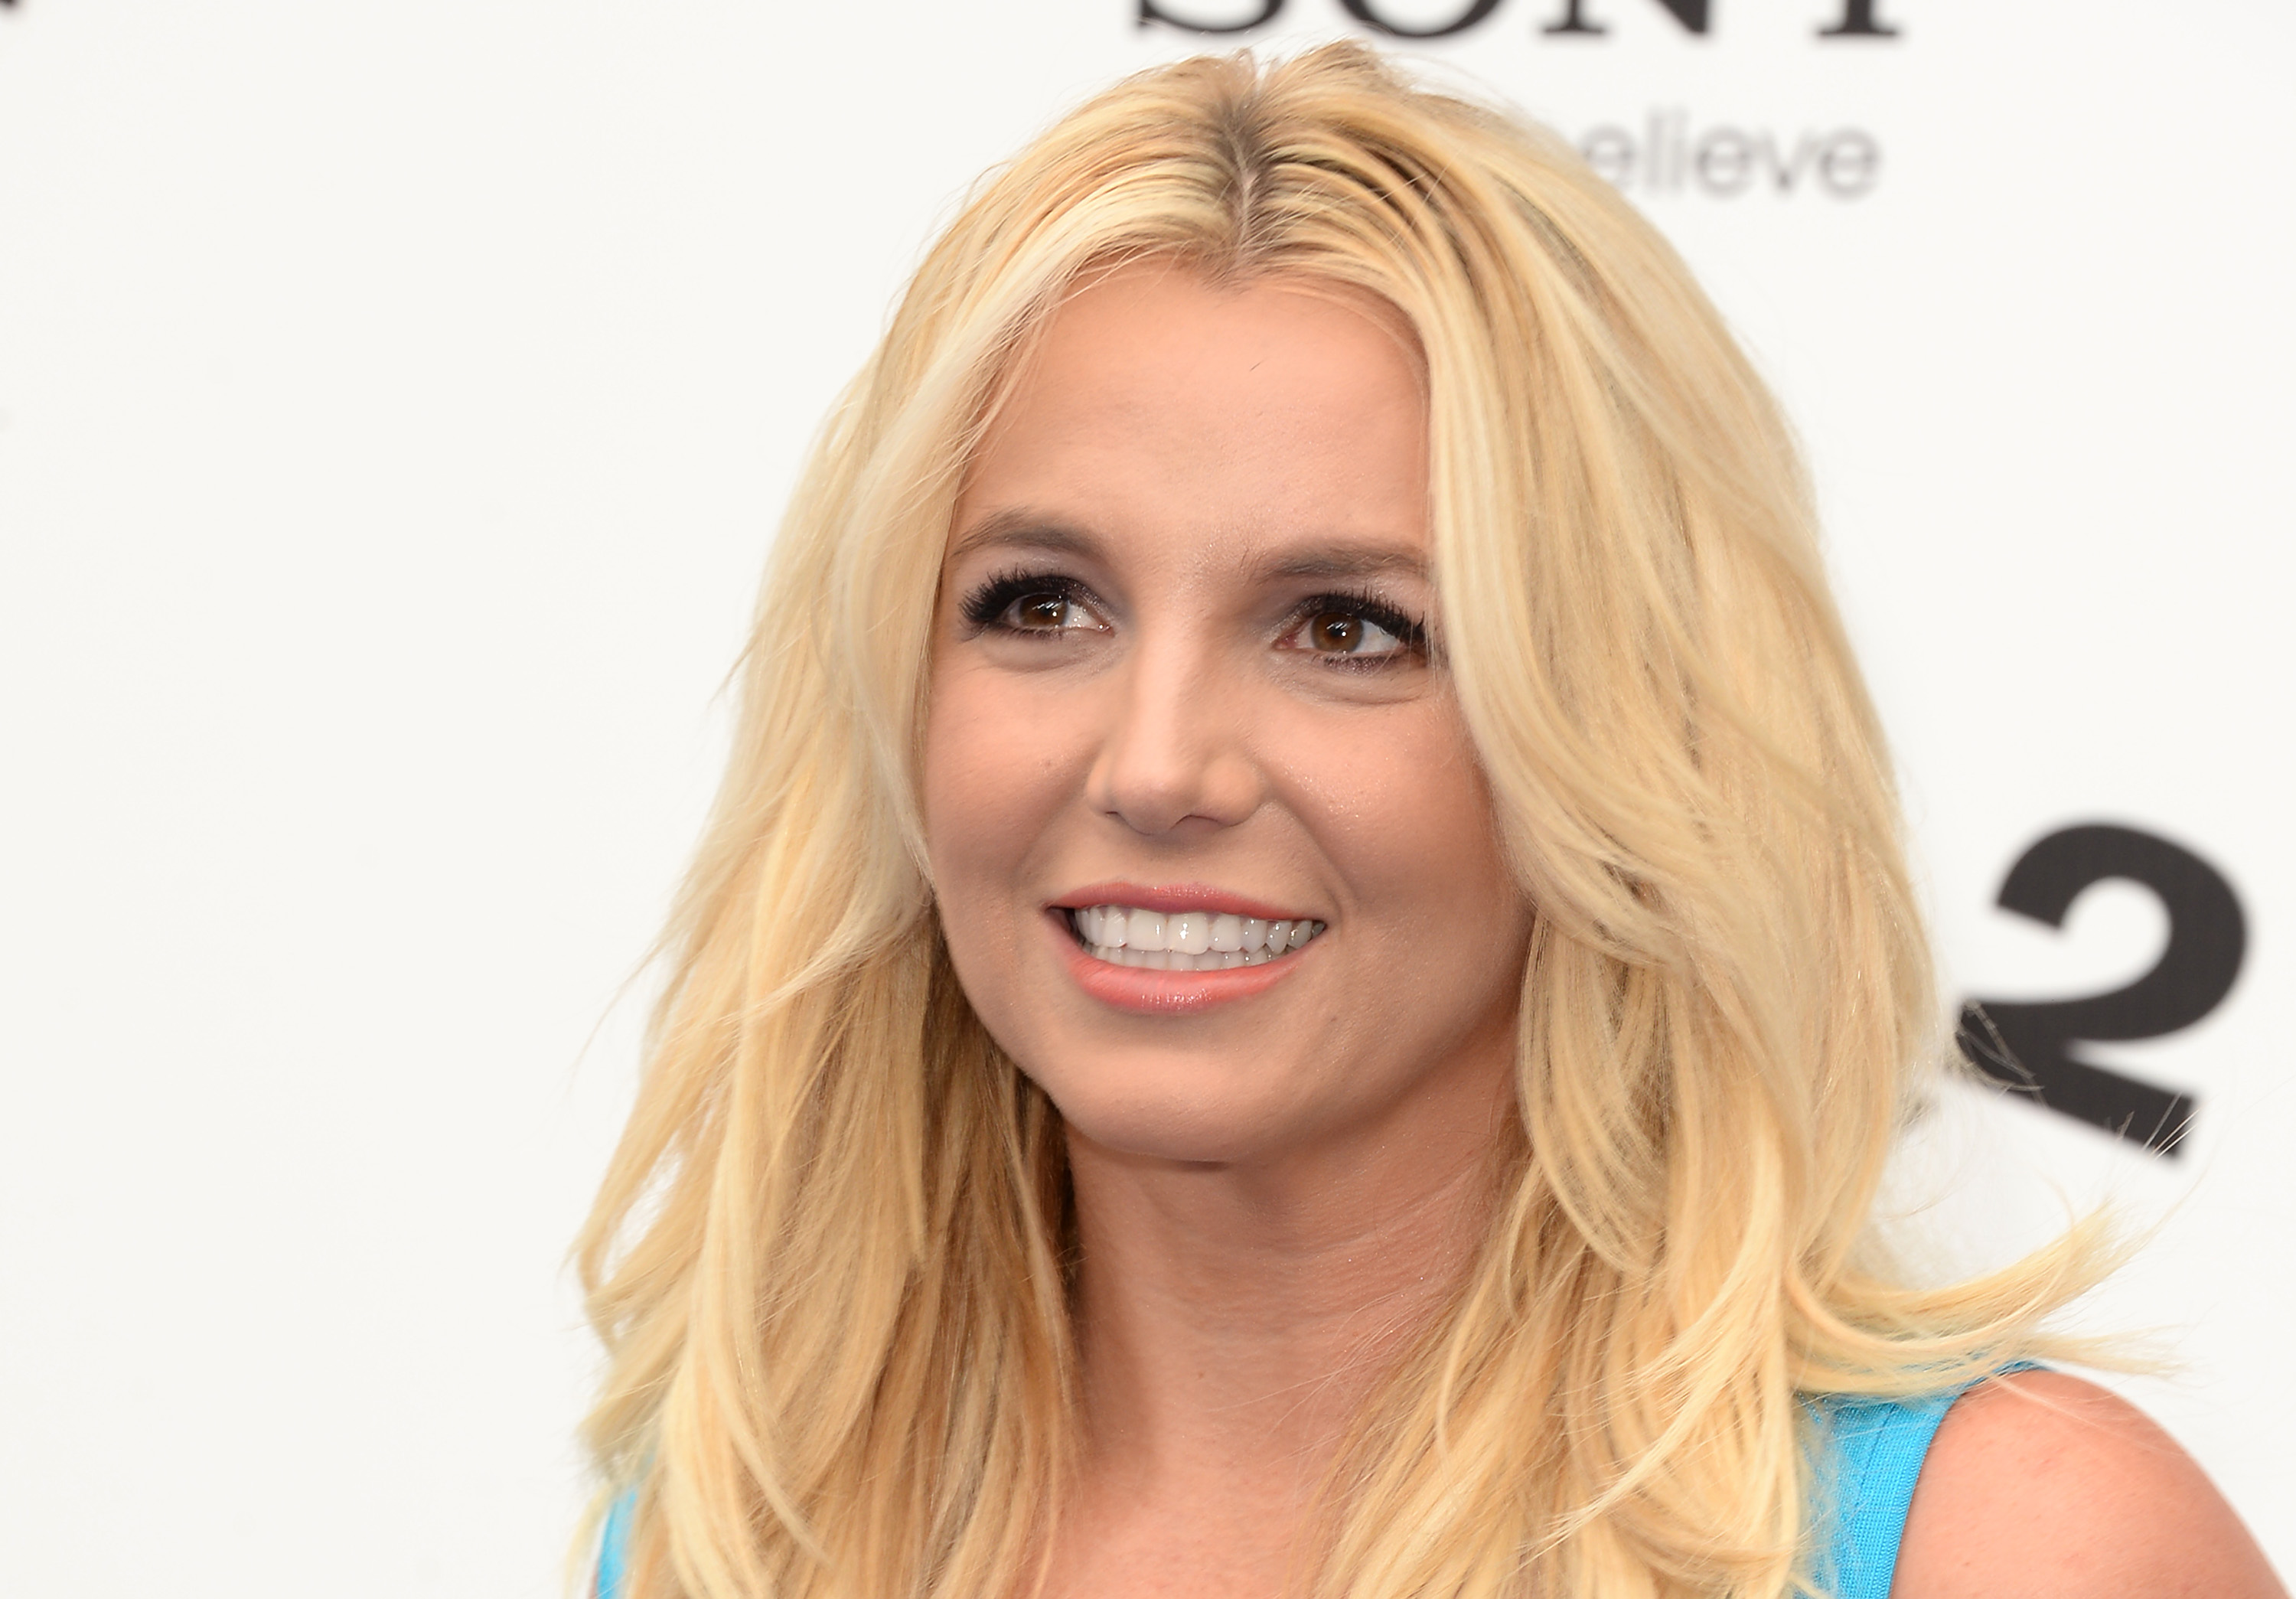 Britney Spears at the "Smurfs 2" premiere at Regency Village Theatre in Westwood, California, on July 28, 2013. | Source: Getty Images